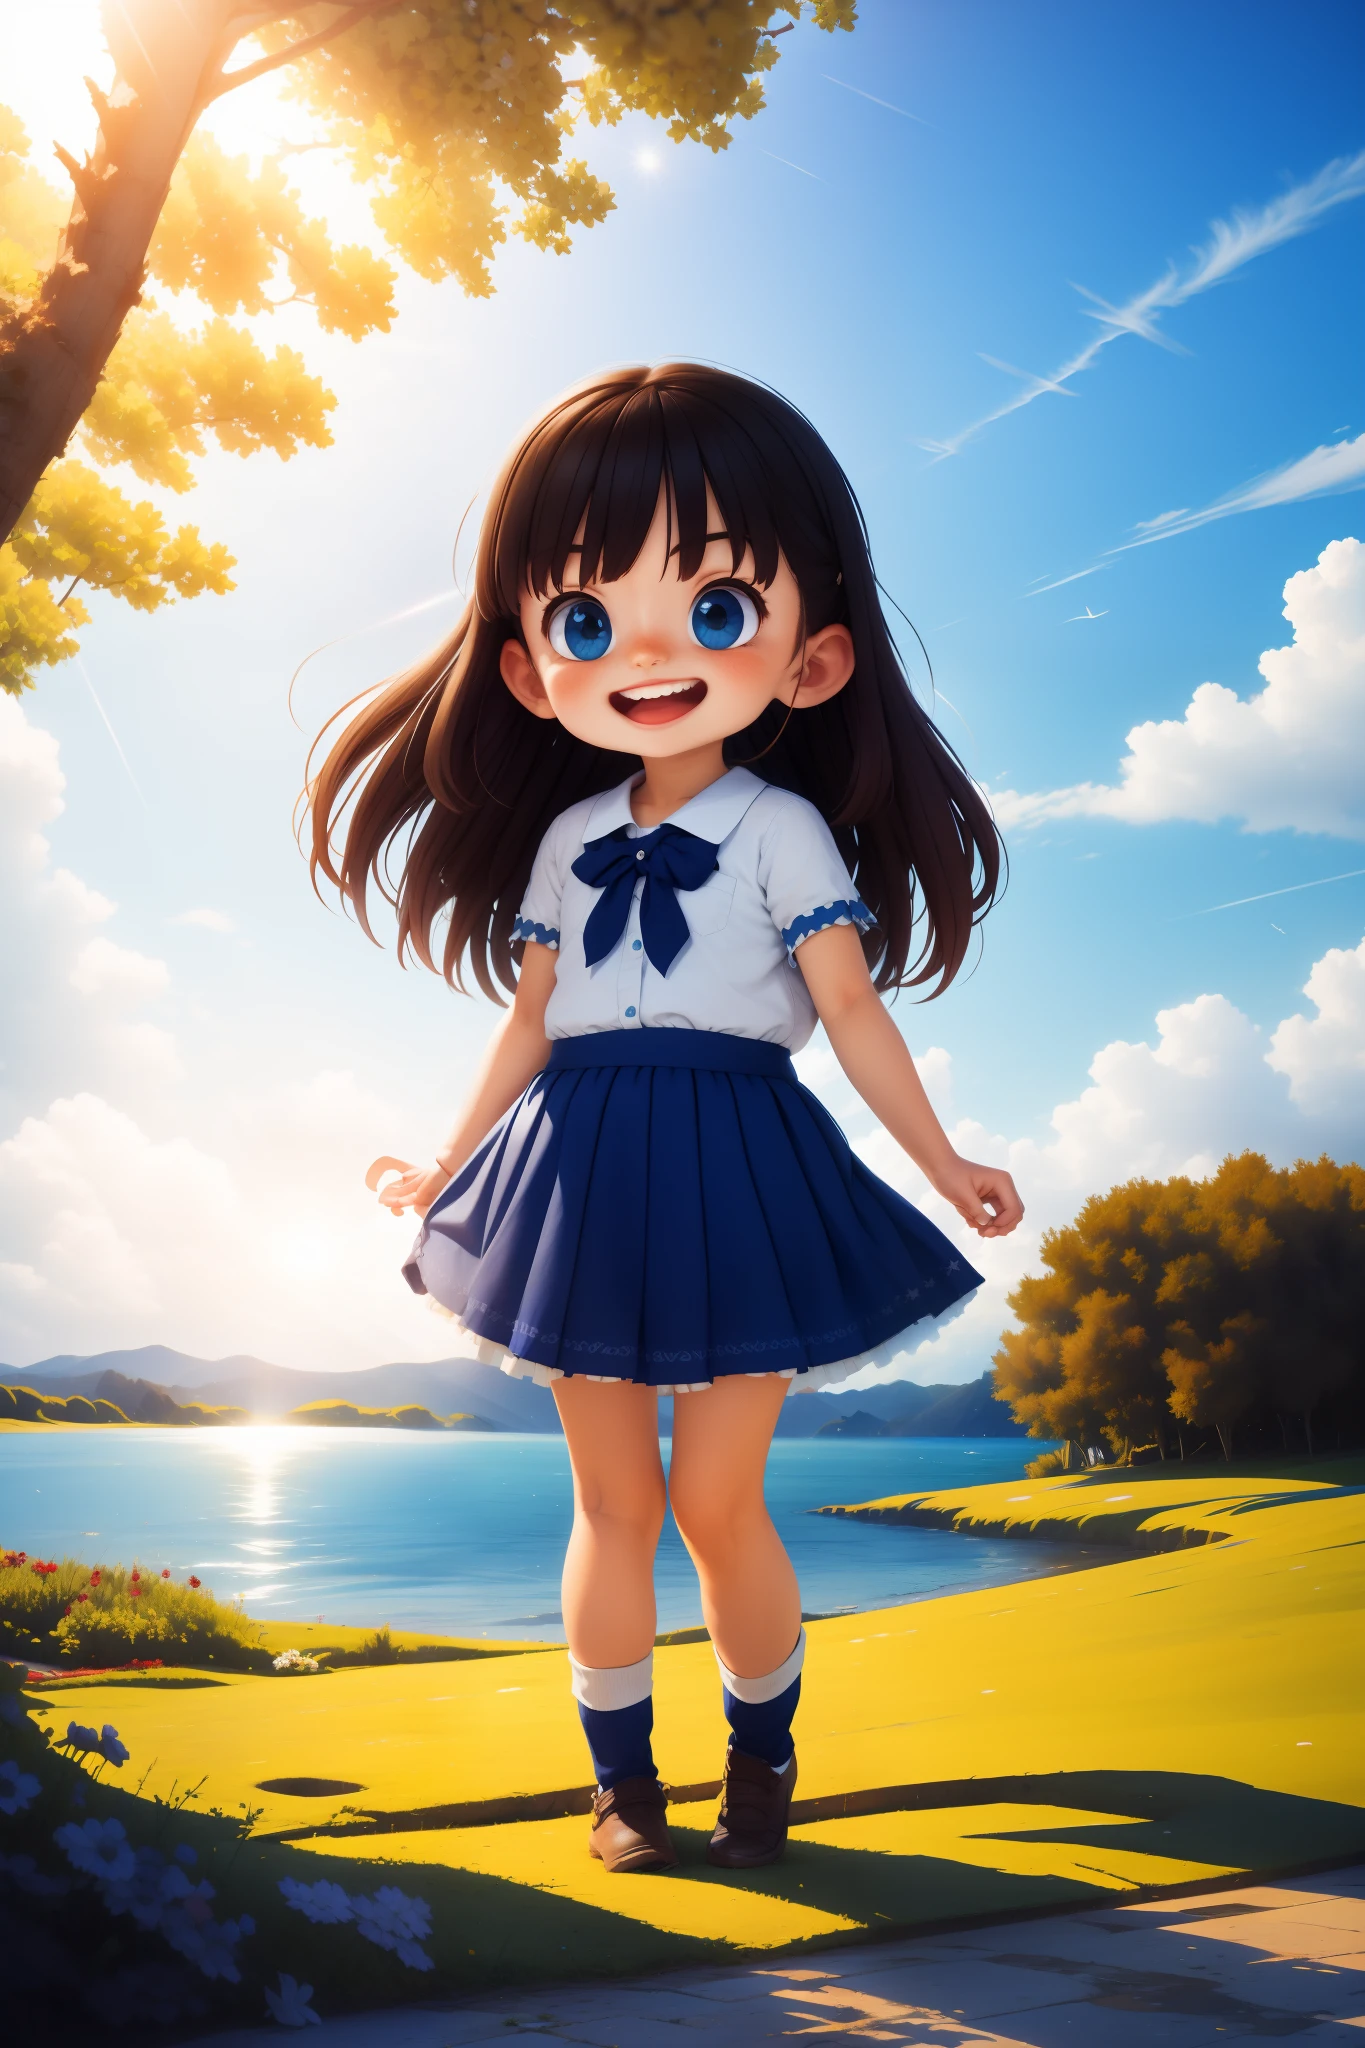 tmasterpiece， High quality, The best quality，1girll， By bangs， sea beach， Blue_sky， Bow knot，pane， The shirt， a skirt， Skysky， ssmile， rays of sunshine， The tree